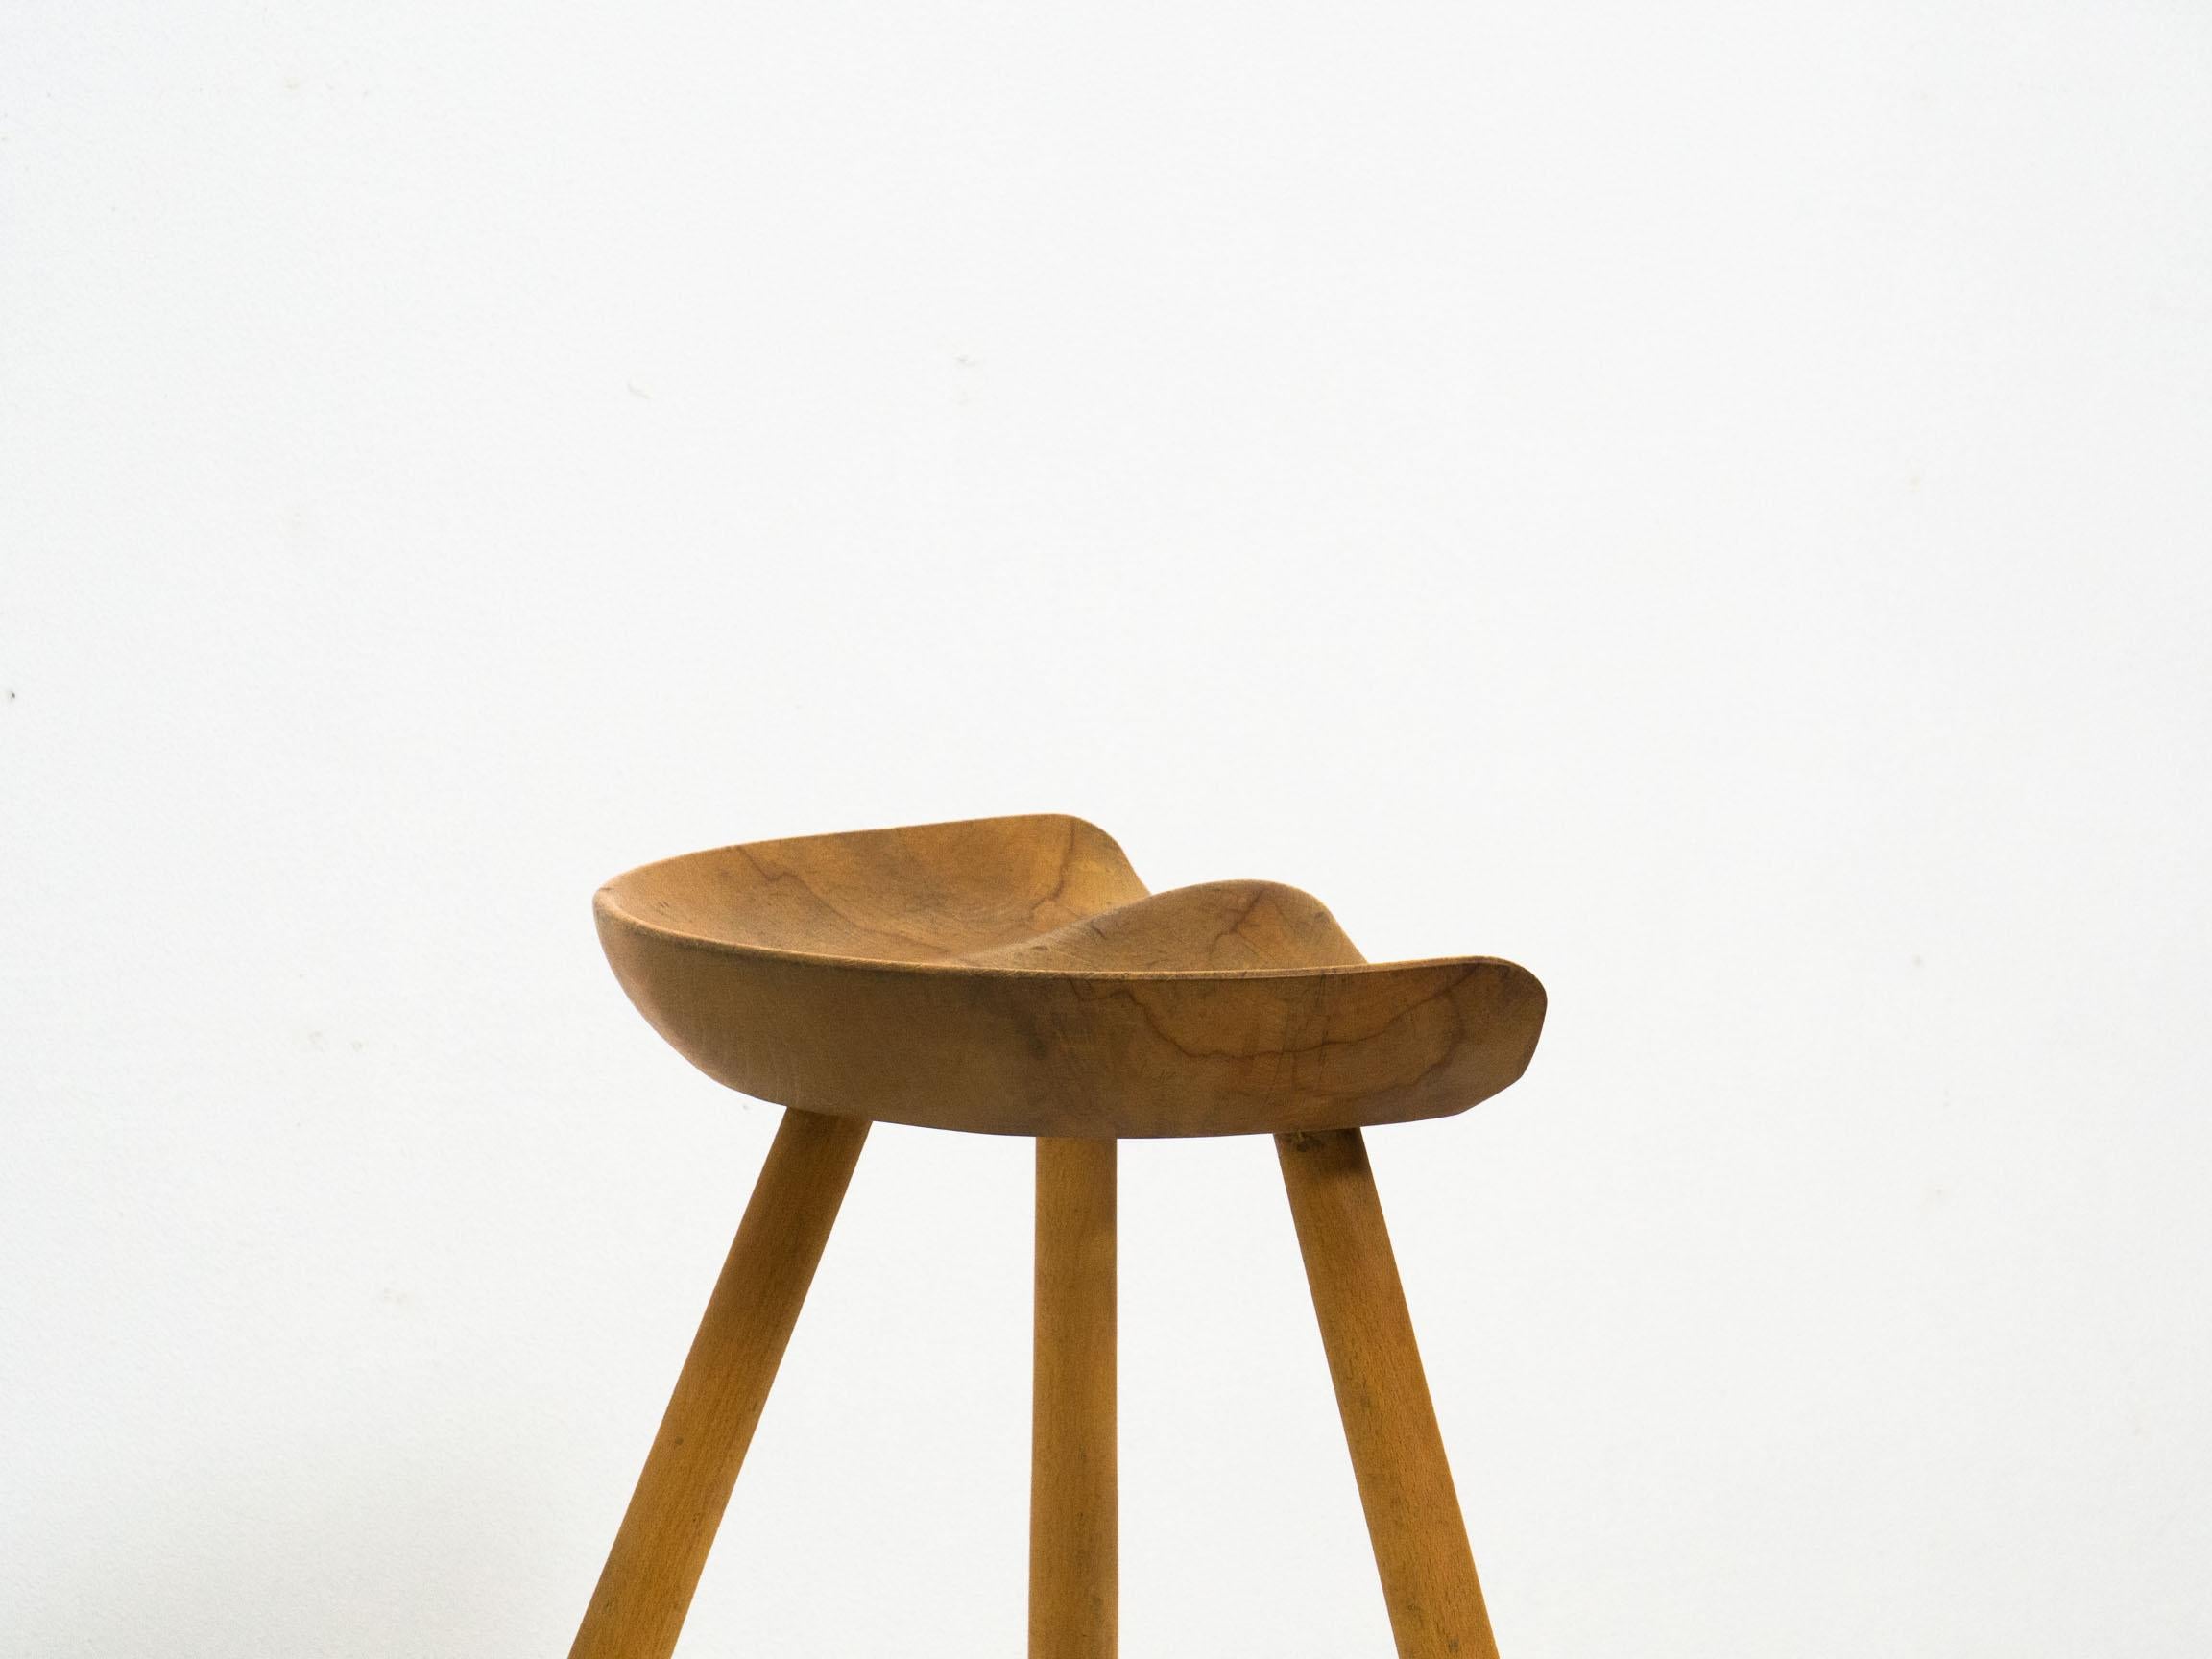 Beech sculptural stool, Danish design.

This stool from Denmark is made in beech wood. The shapes and design resemble those of Arne Hovmand Olsen’s stools.

The stool is in great condition, showing signs of use as part of its authentic appearance.